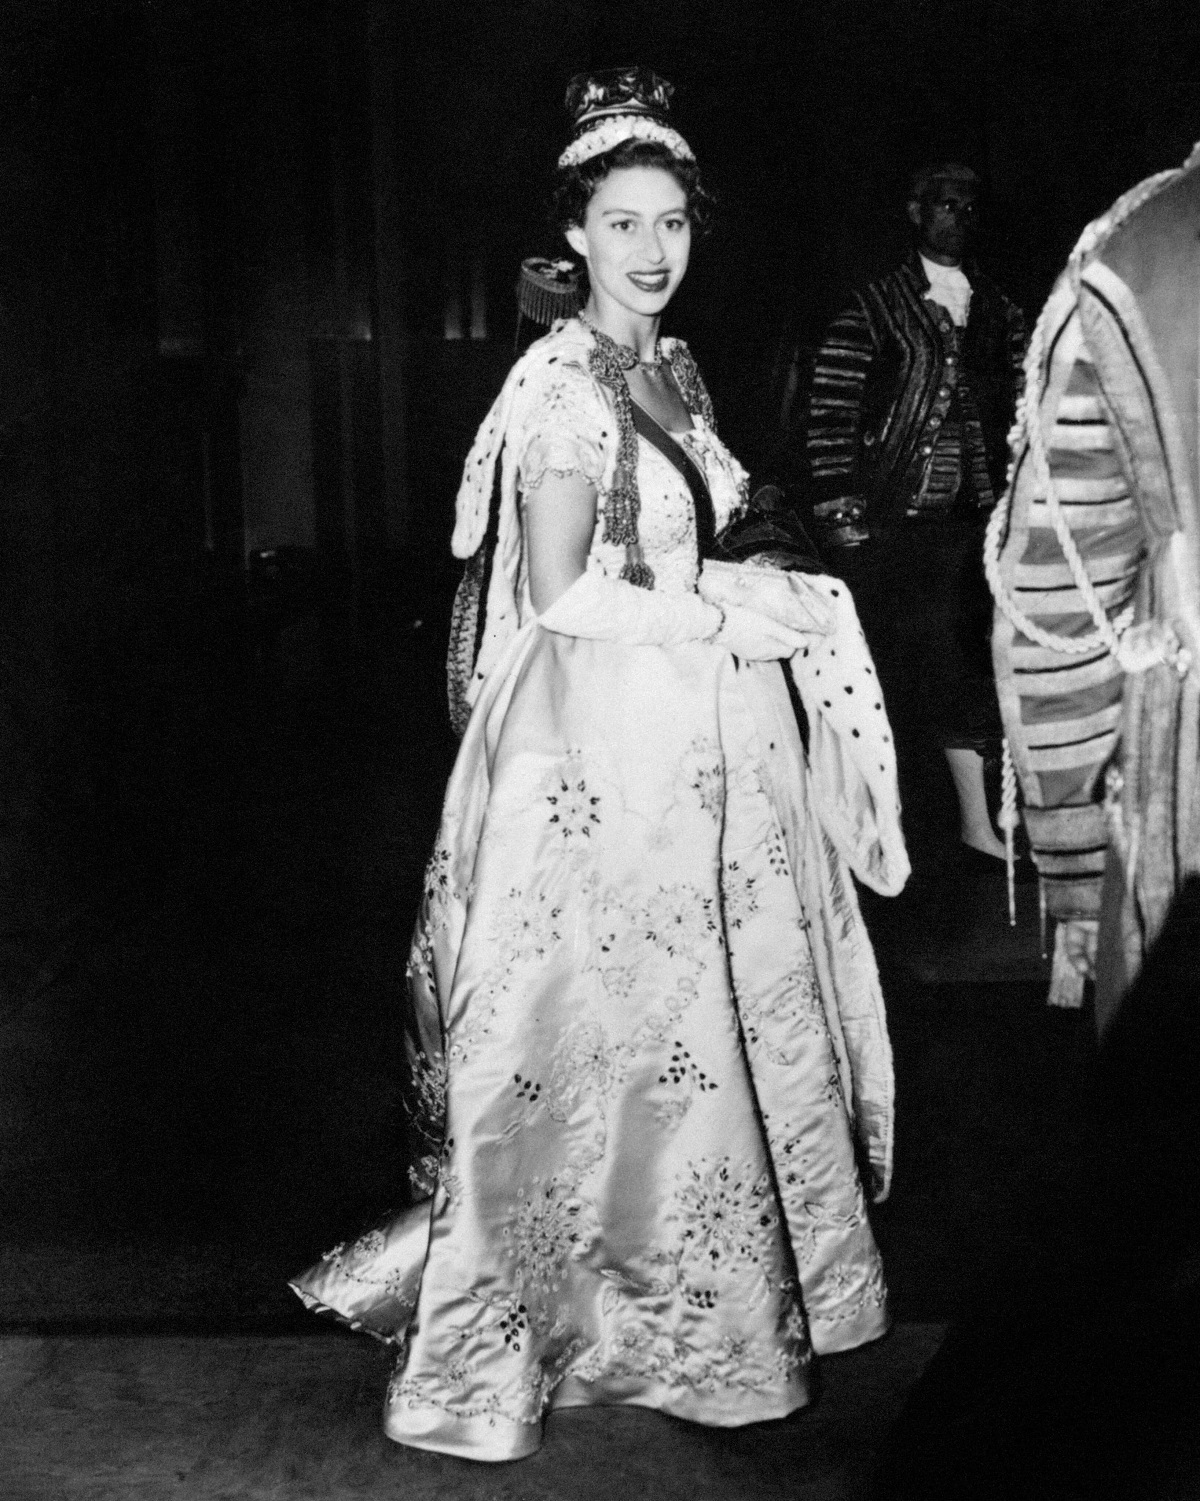 Princess Margaret arriving at Buckingham Palace after the Coronation of her sister Queen Elizabeth II